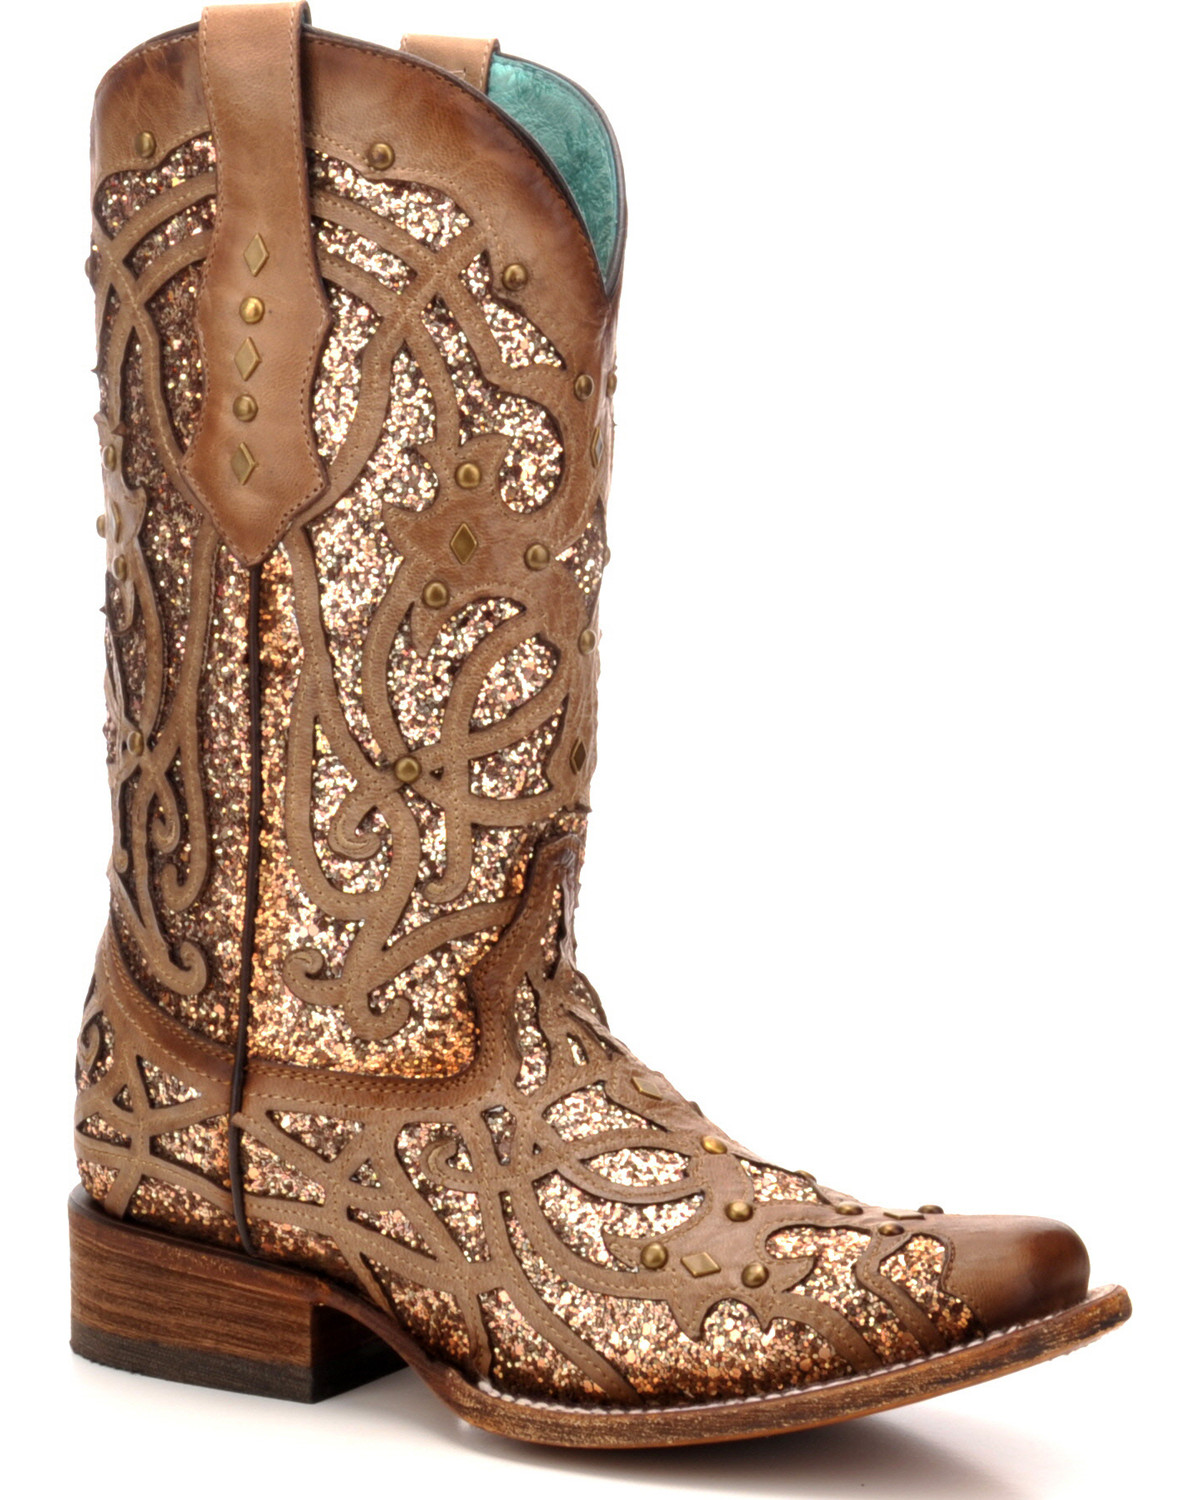 R1289 CORRAL Women's Distressed Cognac Sequin Studded Cowgirl Boot Square Toe 